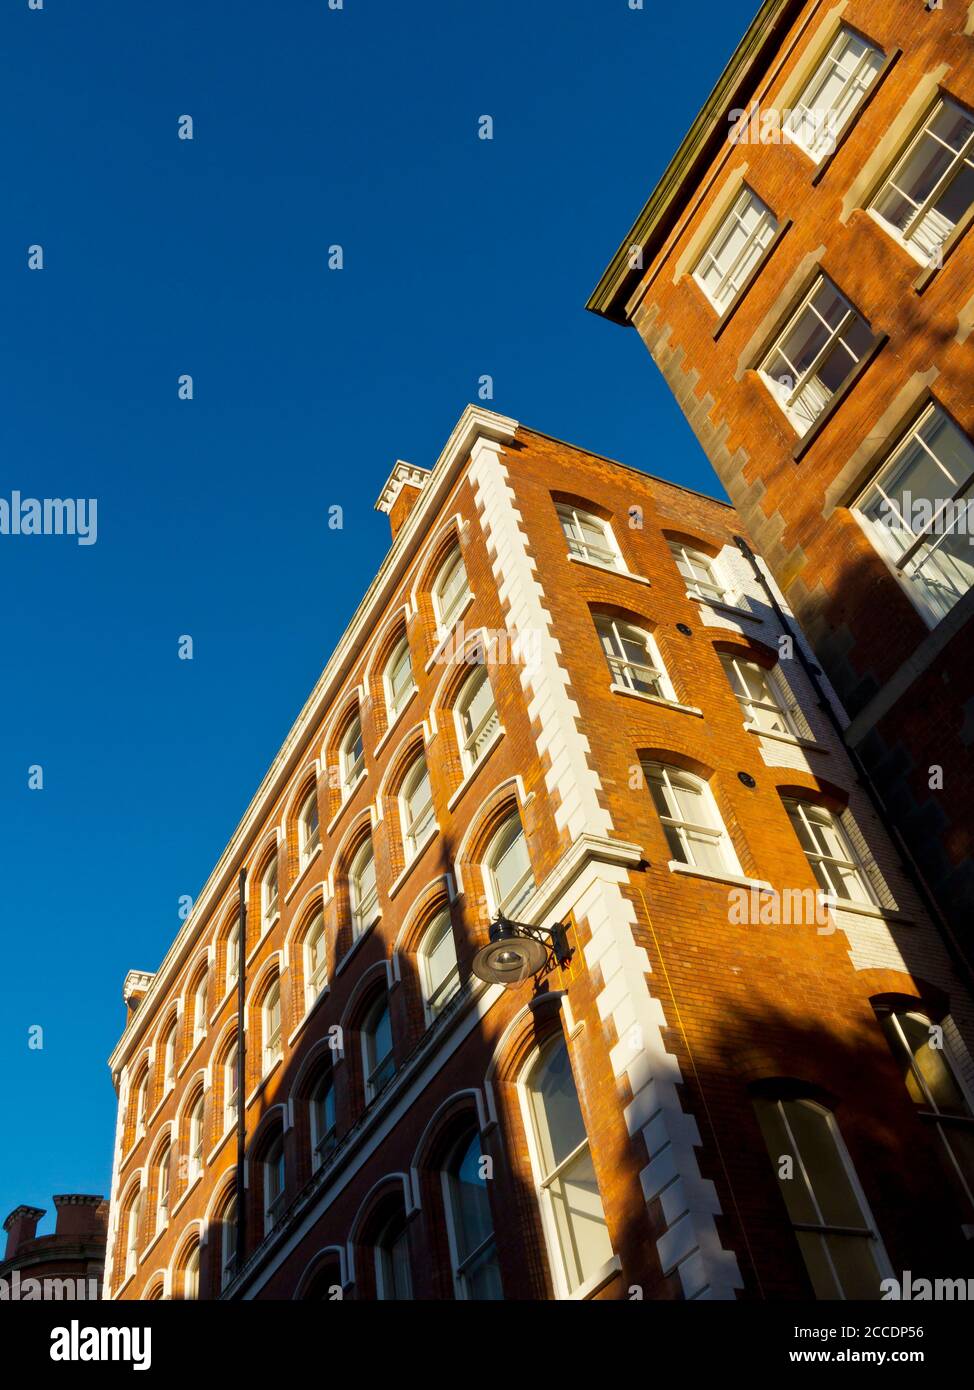 View looking up at typical buildings in the Lace Market area of Nottingham city centre England UK Stock Photo